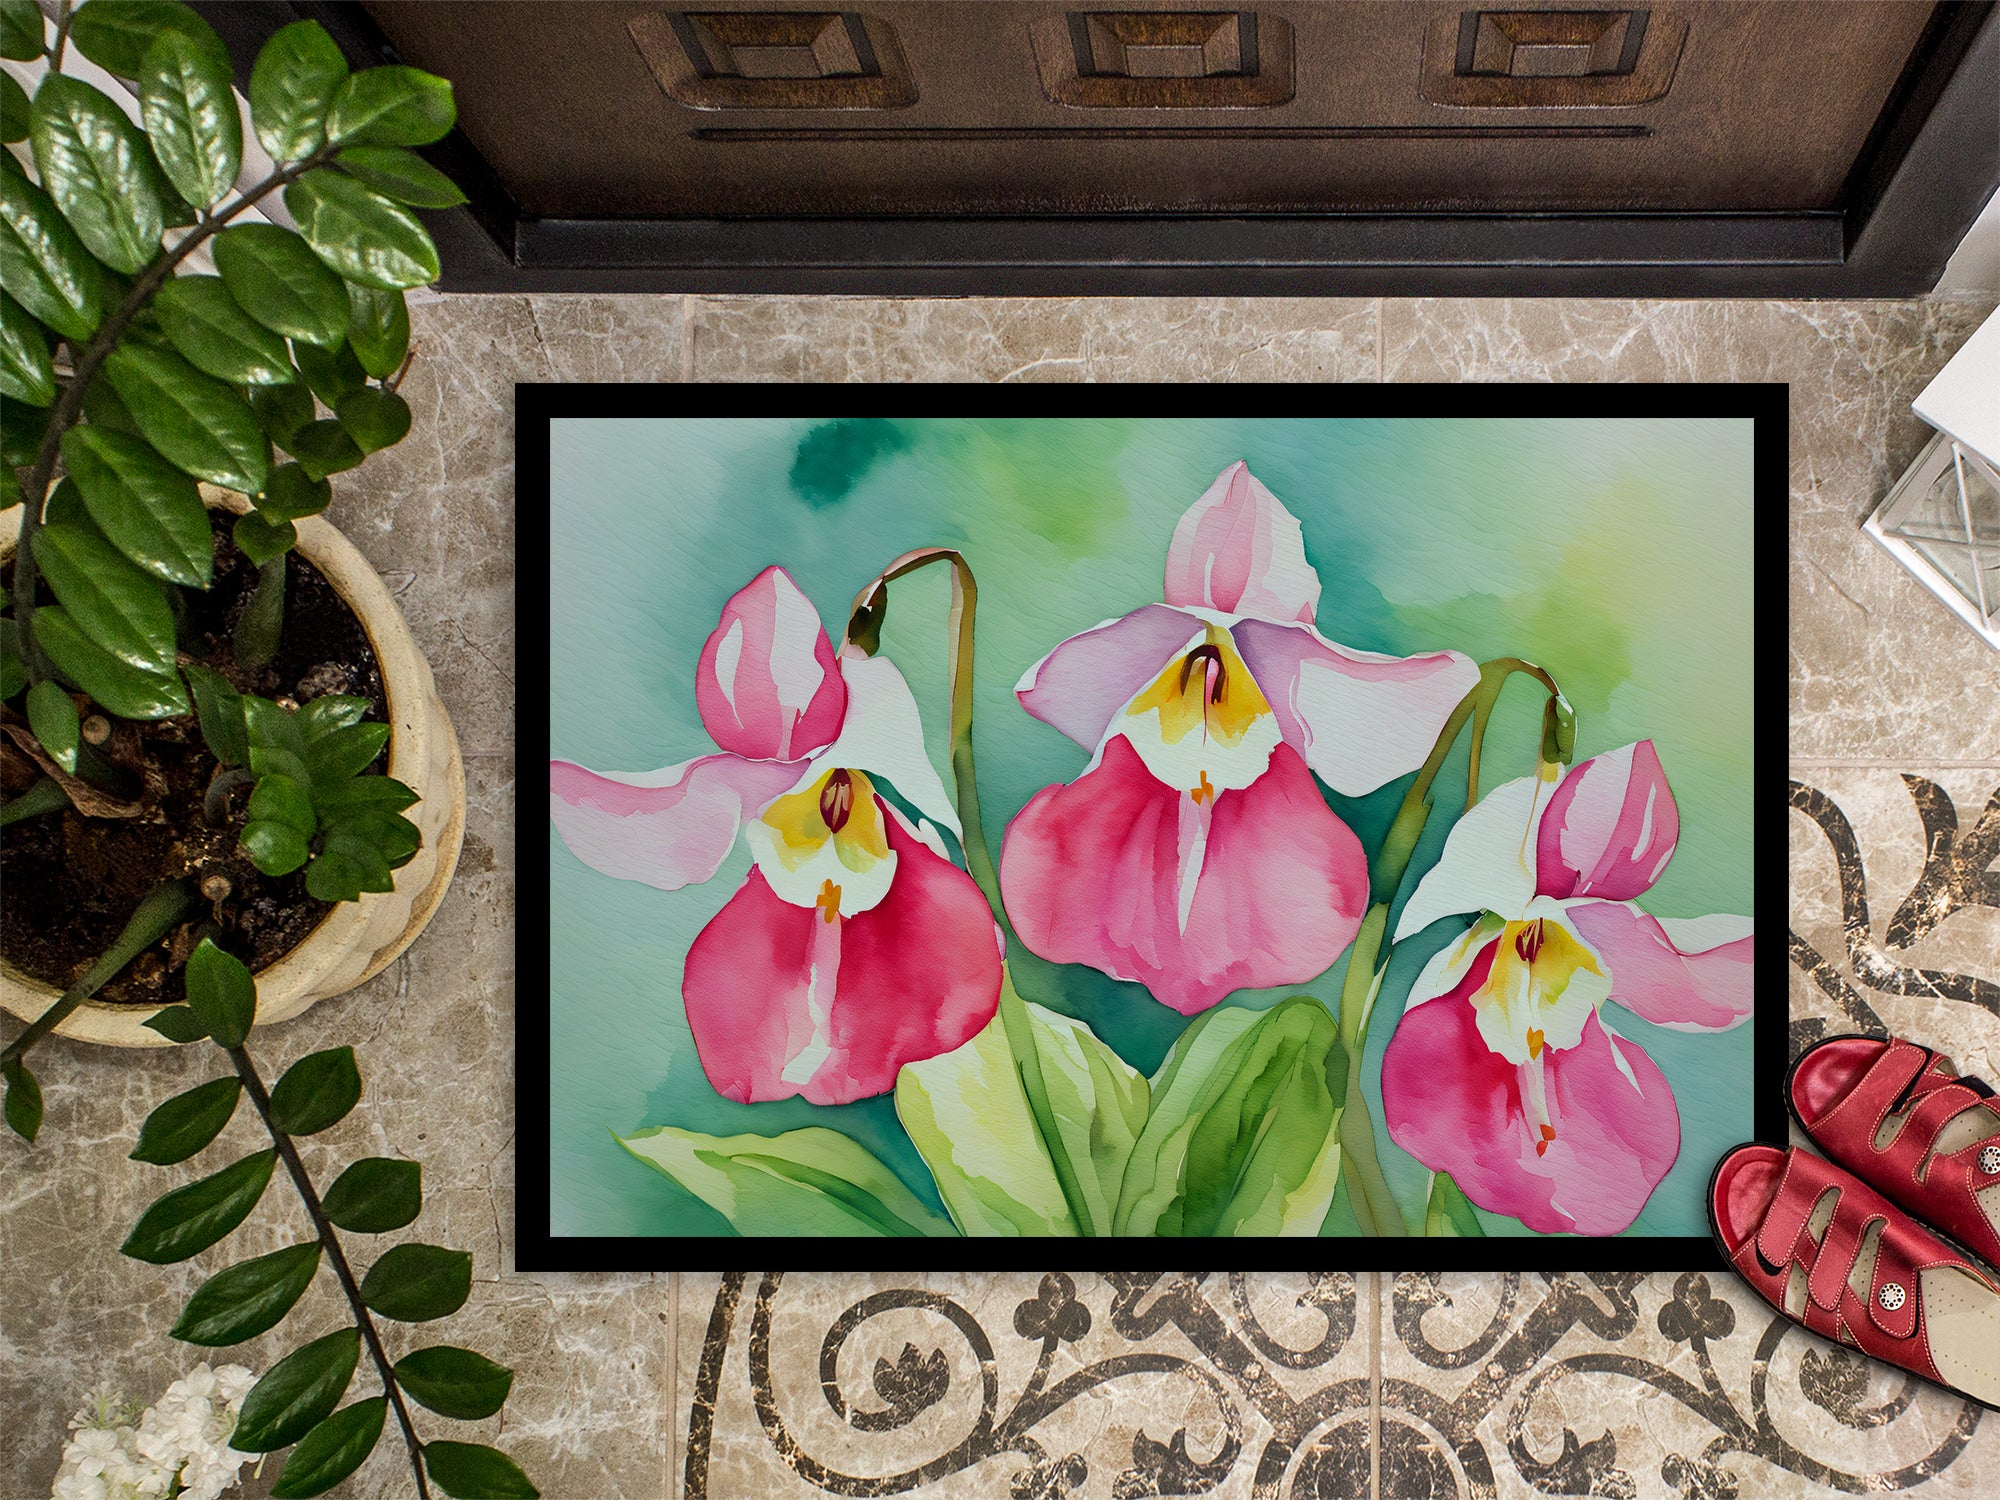 Minnesota Pink and White Lady’s Slippers in Watercolor Doormat 18x27